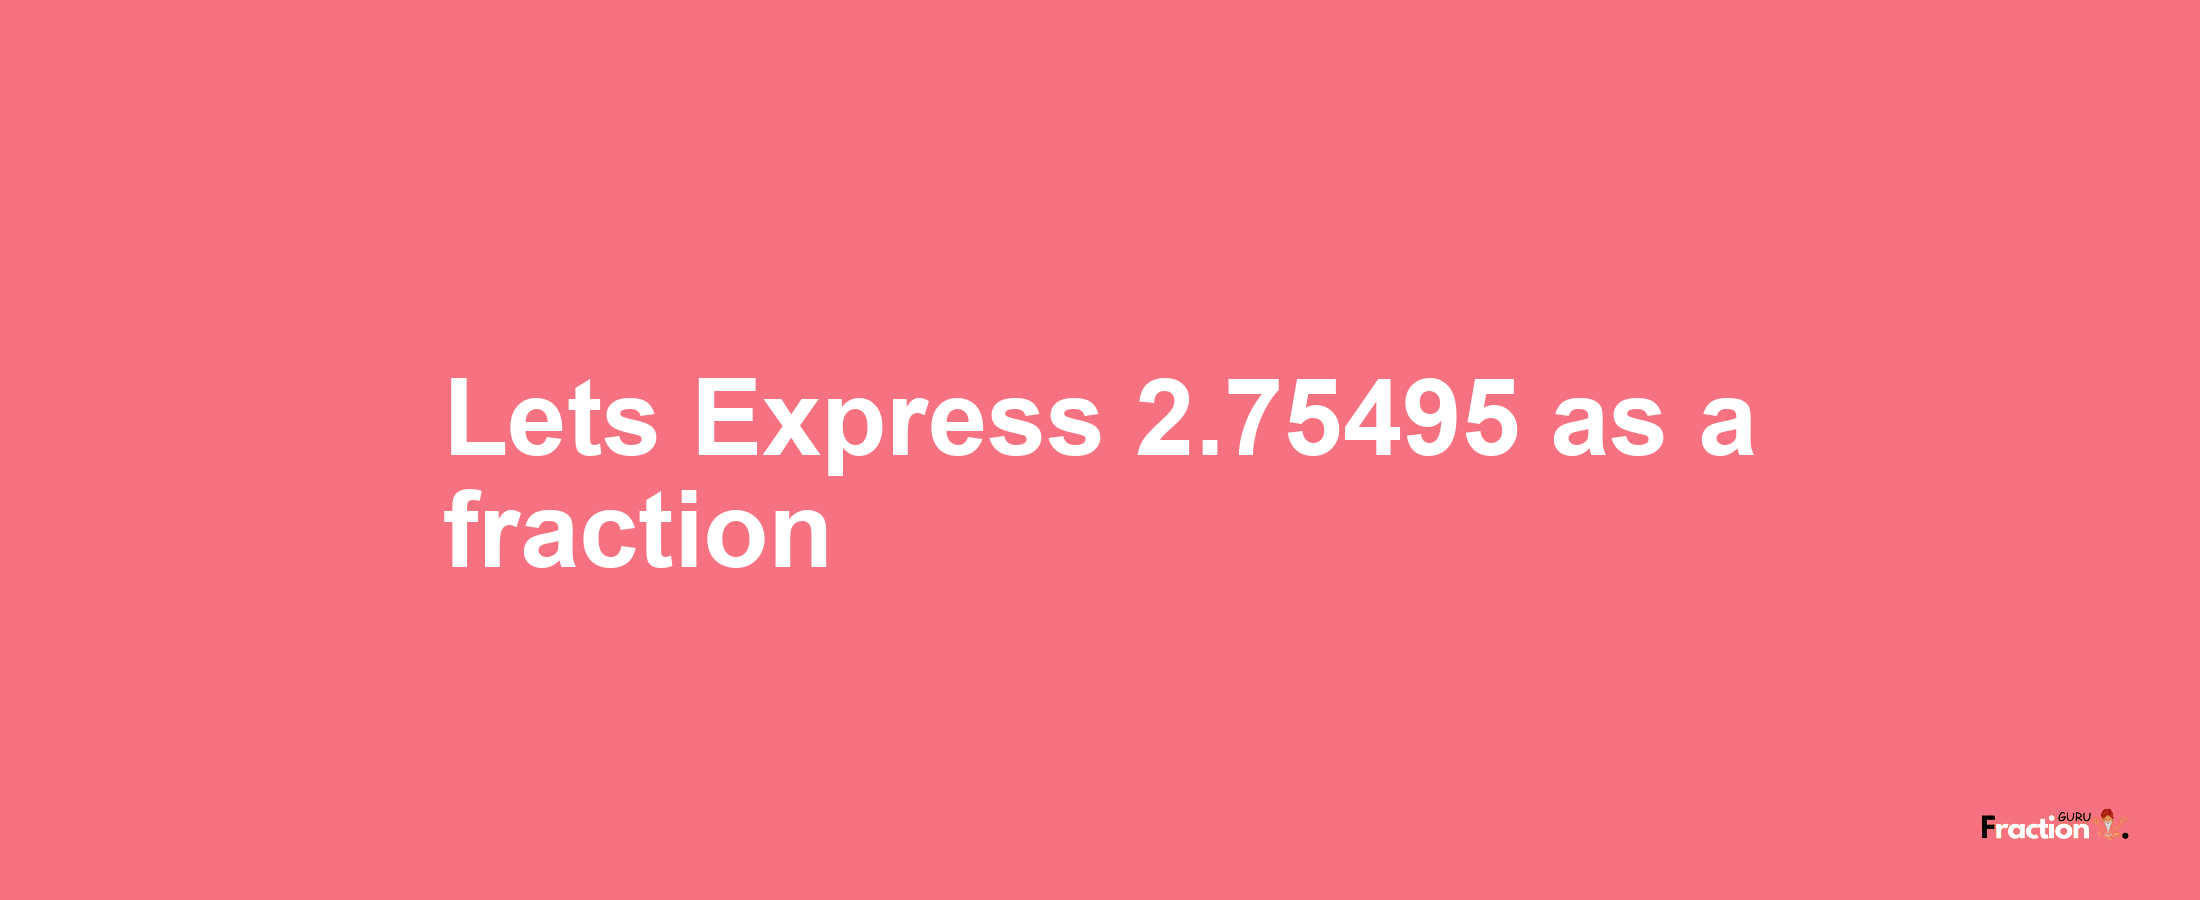 Lets Express 2.75495 as afraction